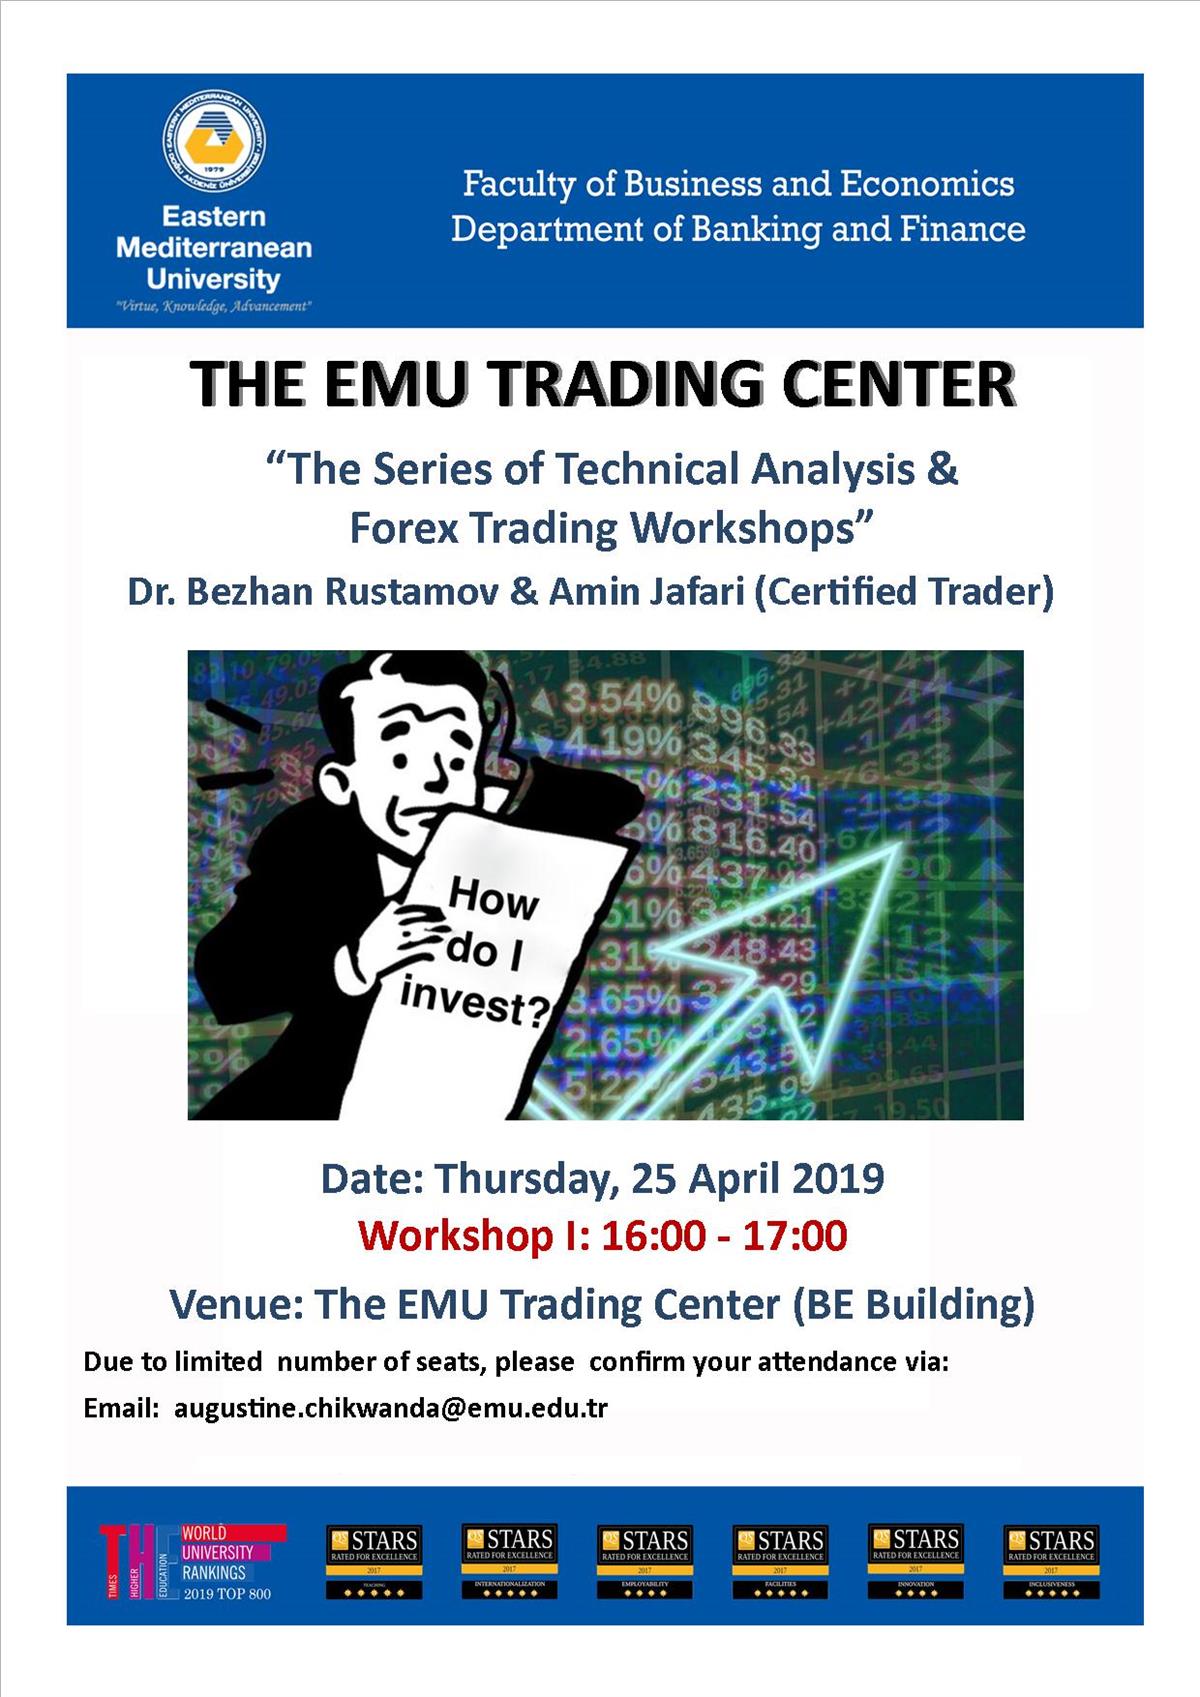 THE EMU TRADING CENTER: "The Series of Technical Analysis and Forex Trading Workshops" 